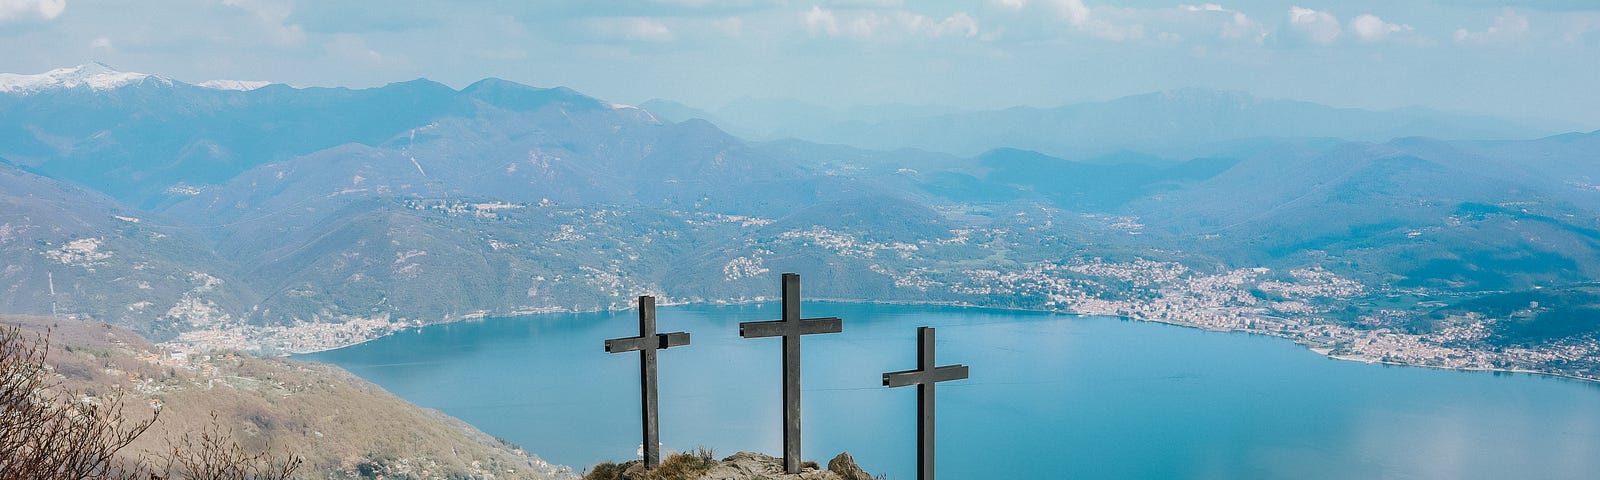 Three crosses on a sandy mountain overlooking a large body of bright blue water on a sunny day.